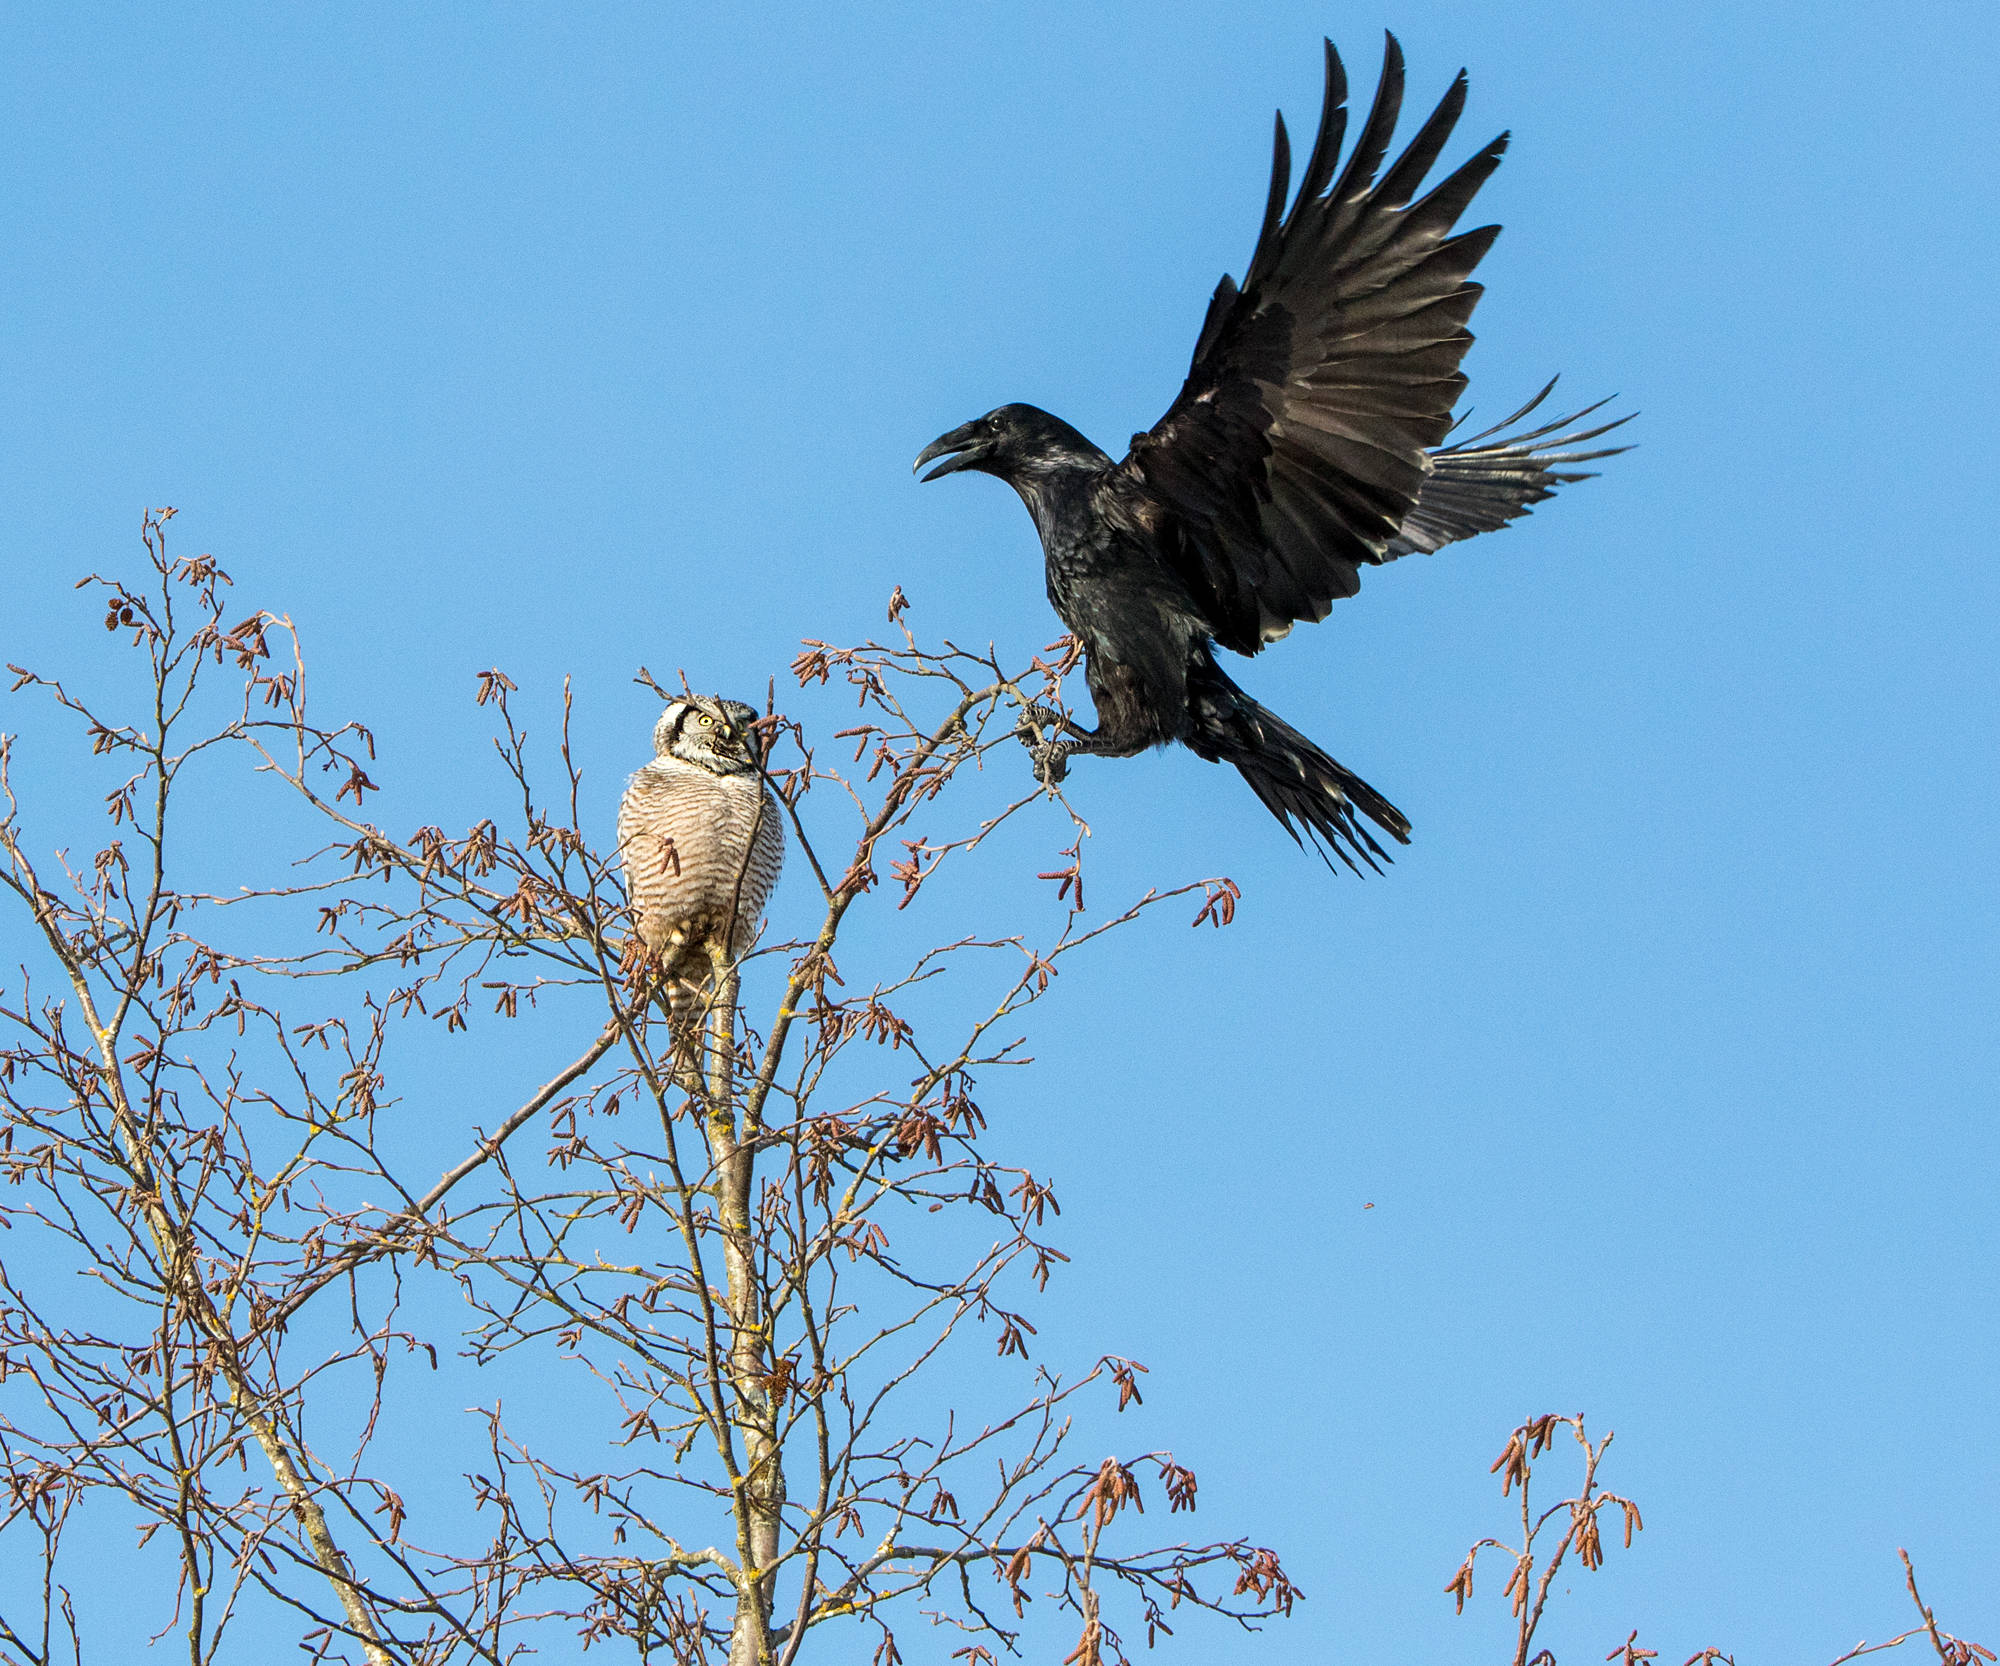 A raven lands near a hawk owl, harassing and calling loudly. (Photo by Jos Bakker)